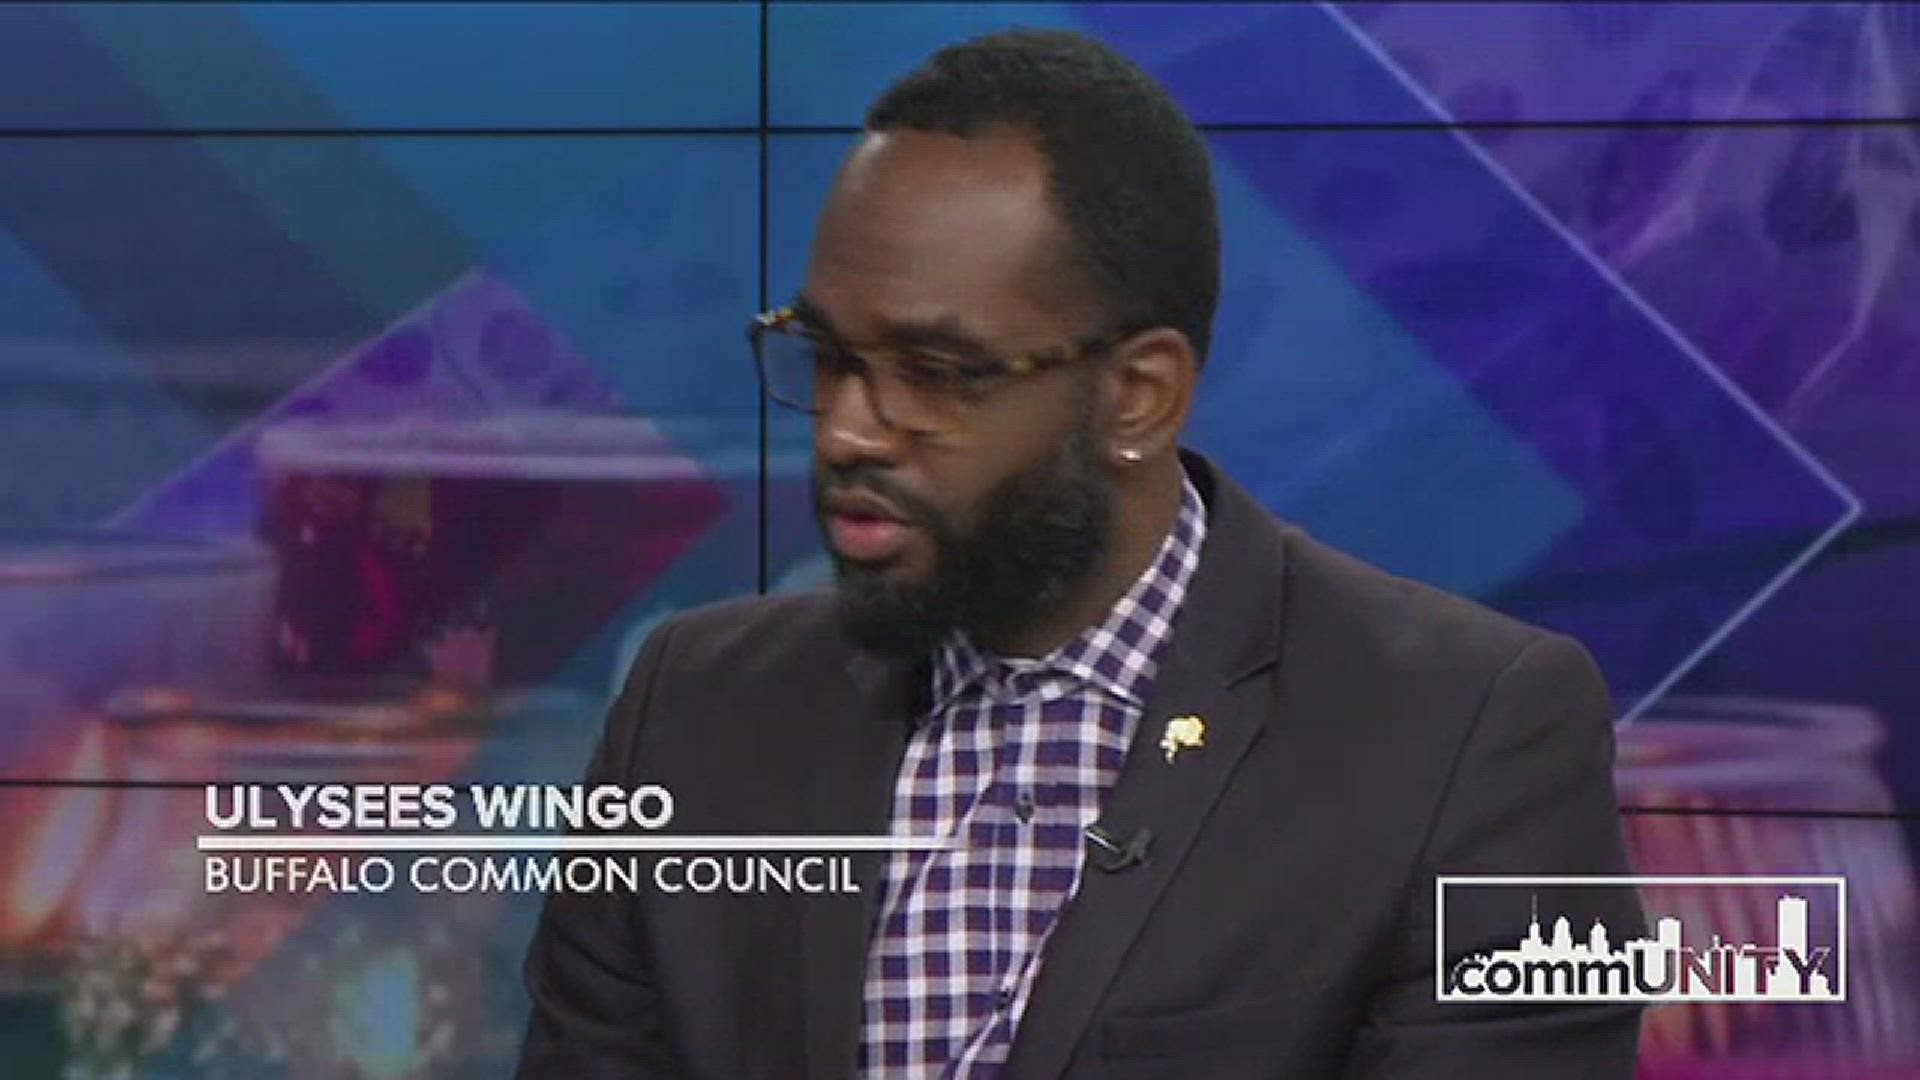 Buffalo Common Council member Ulysees Wingo discusses a reality, that the East Side of Buffalo is a food desert.